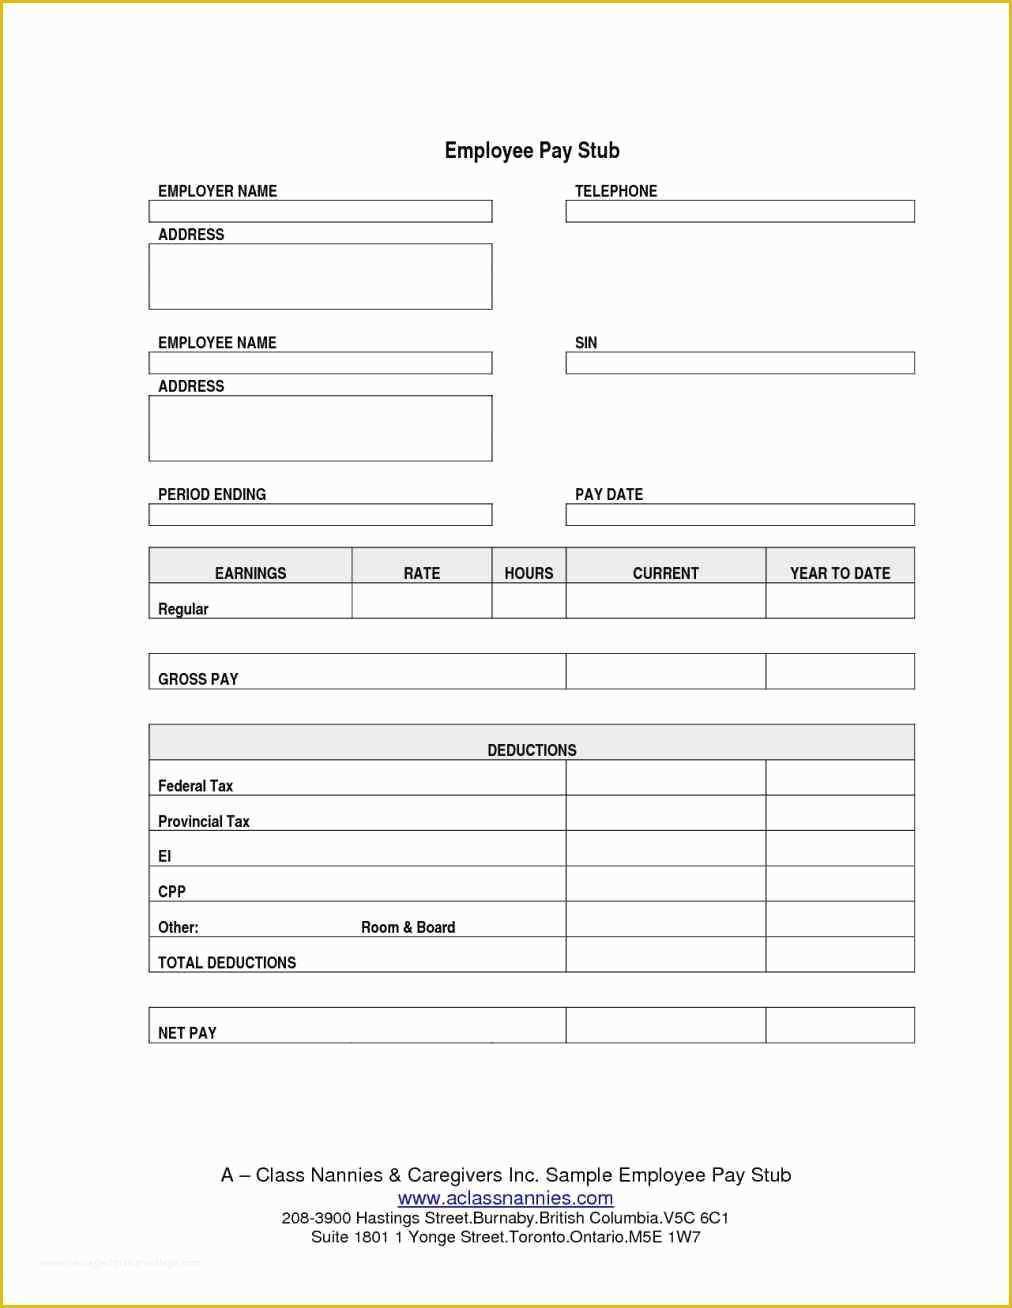 Free Pay Stub Maker Template Of Check Stub Creator Resume format software 1099 Pay